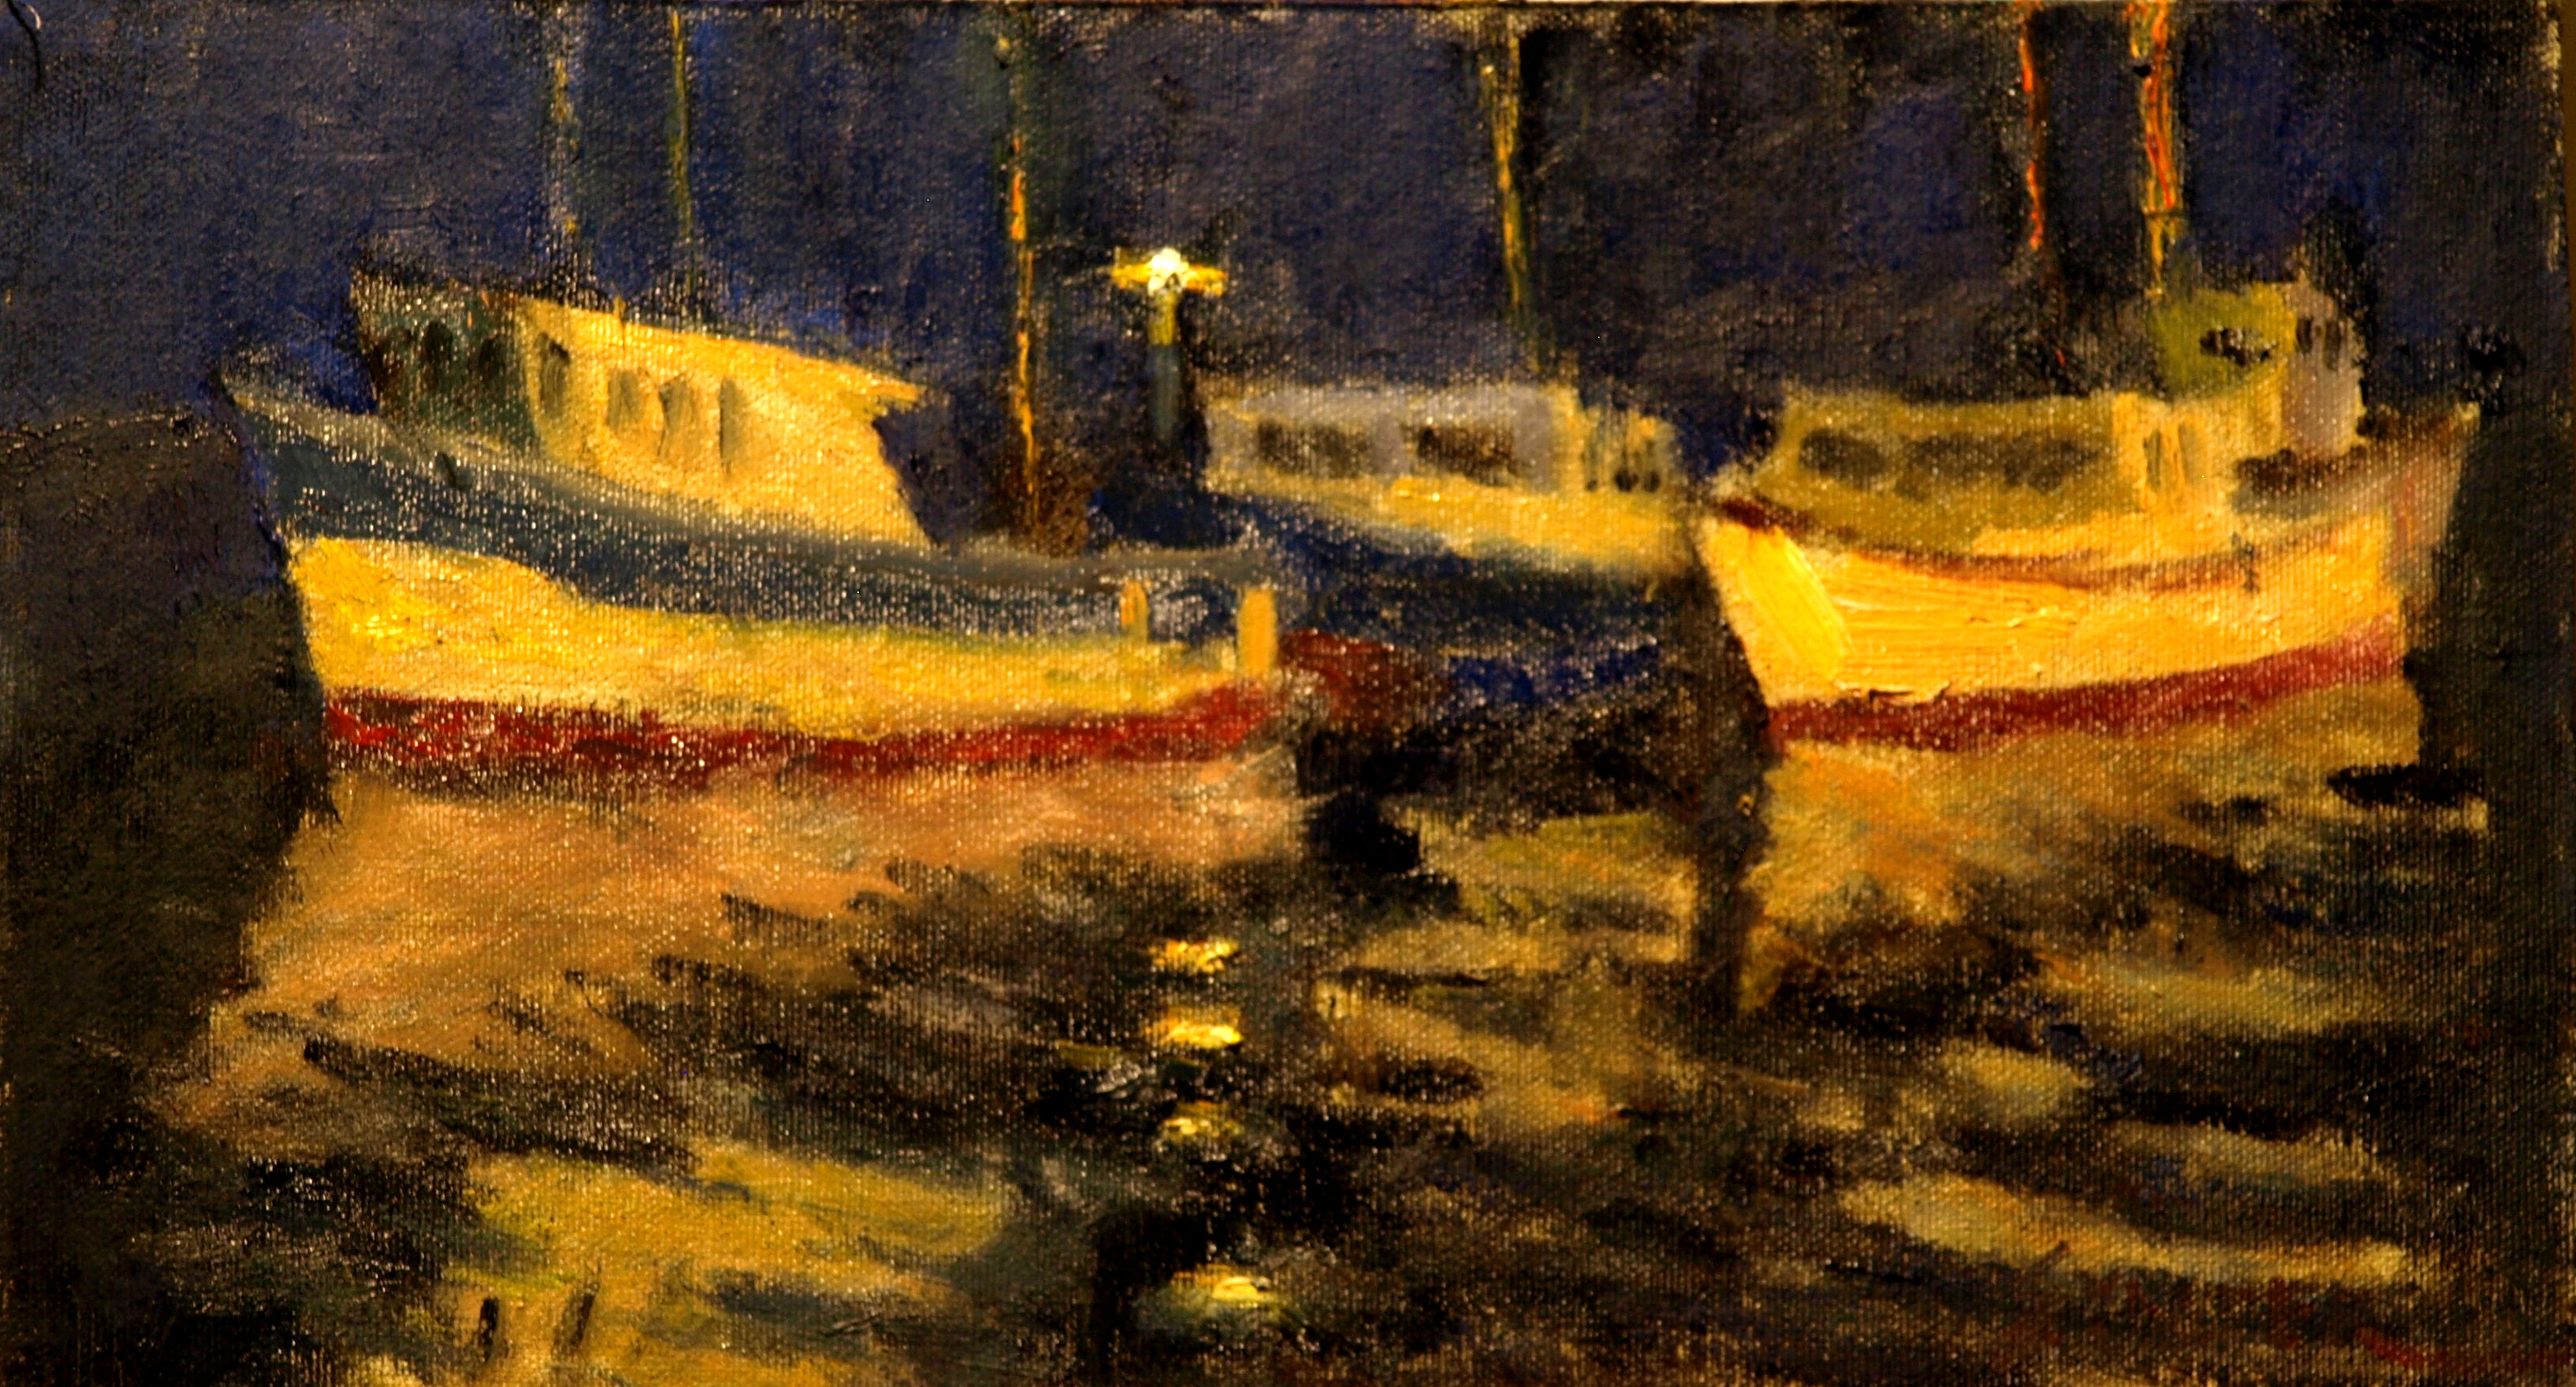 Night Reflections, Oil on Canvas on Panel, 8 x 14 Inches, by Richard Stalter, $225